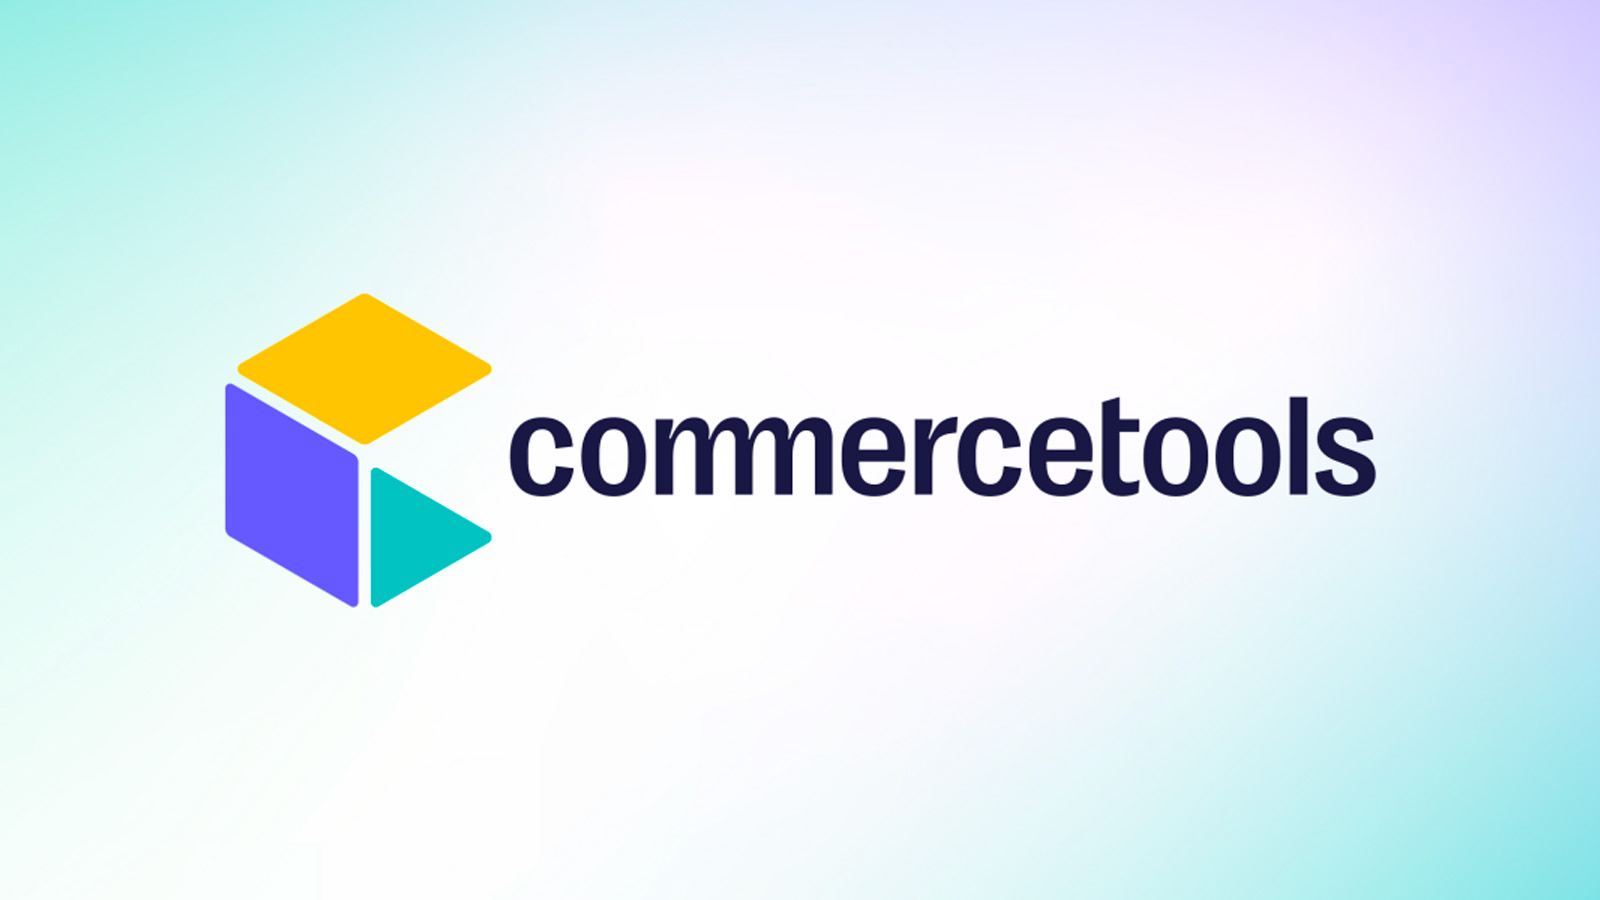 Eagle Eye Announces New Partnership with commercetools to Help Retailers Deliver Enhanced Personalization